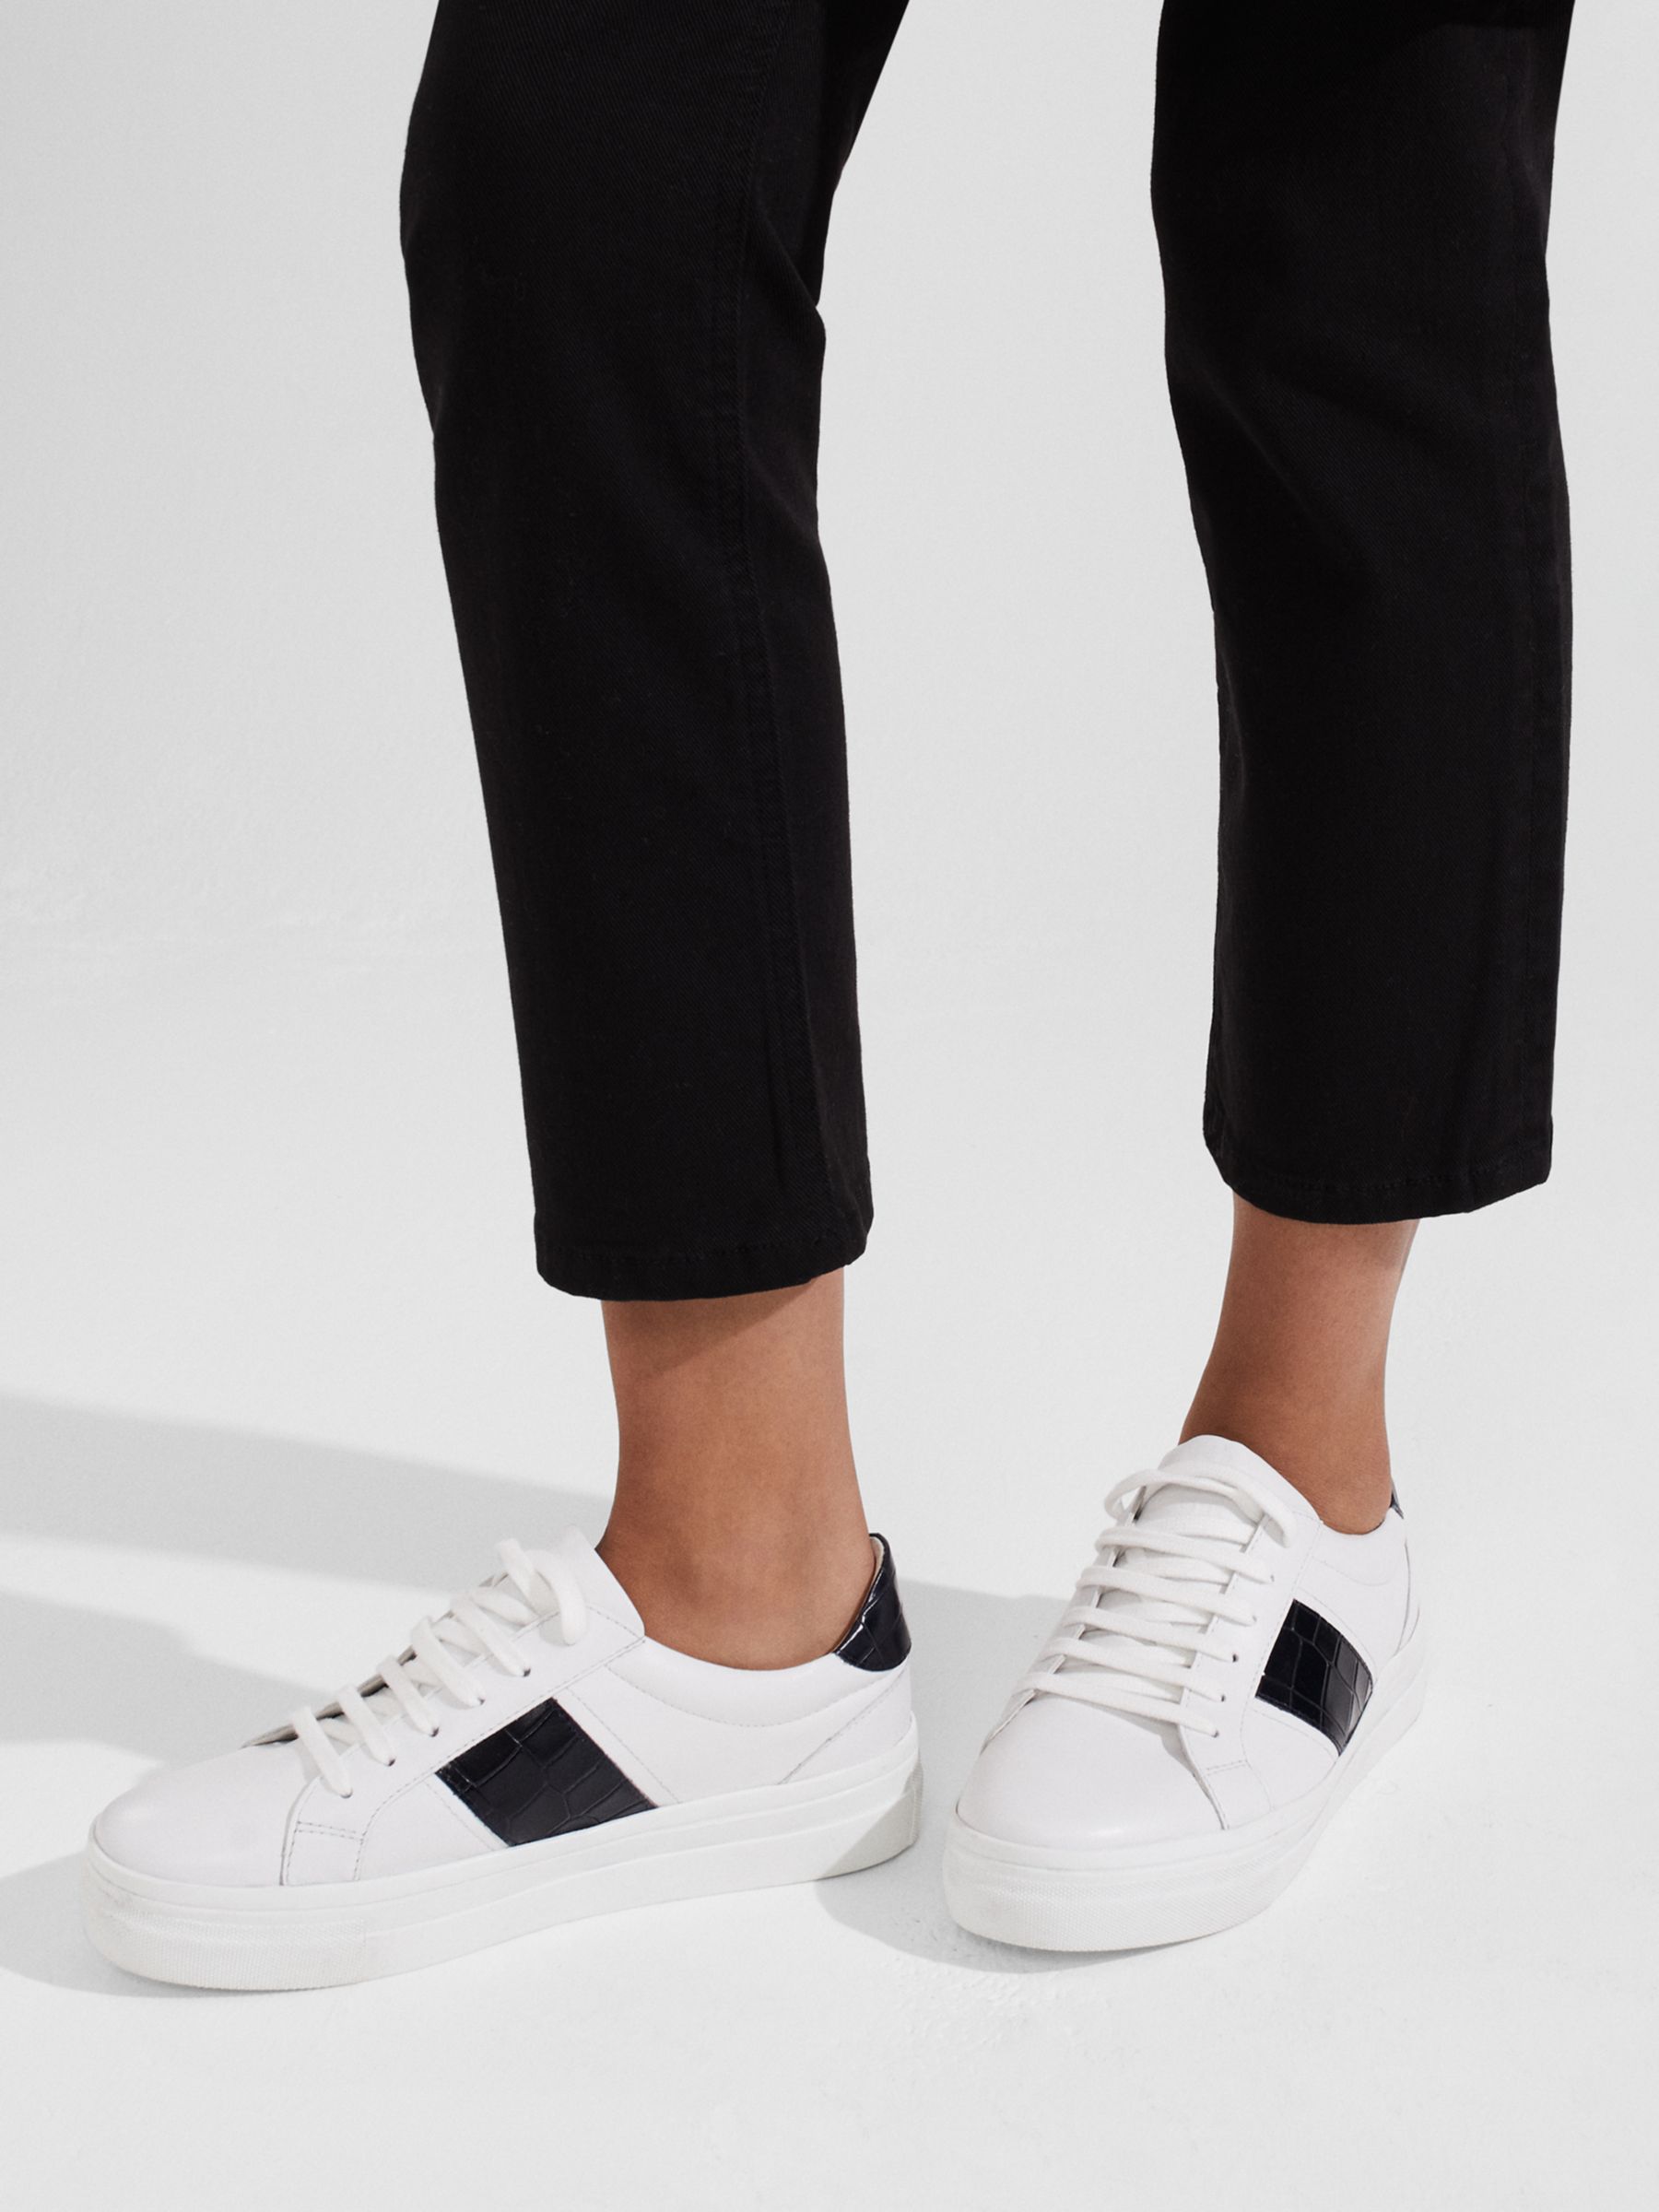 Hobbs Victoria Low Top Leather Trainers, White/Black at John Lewis ...